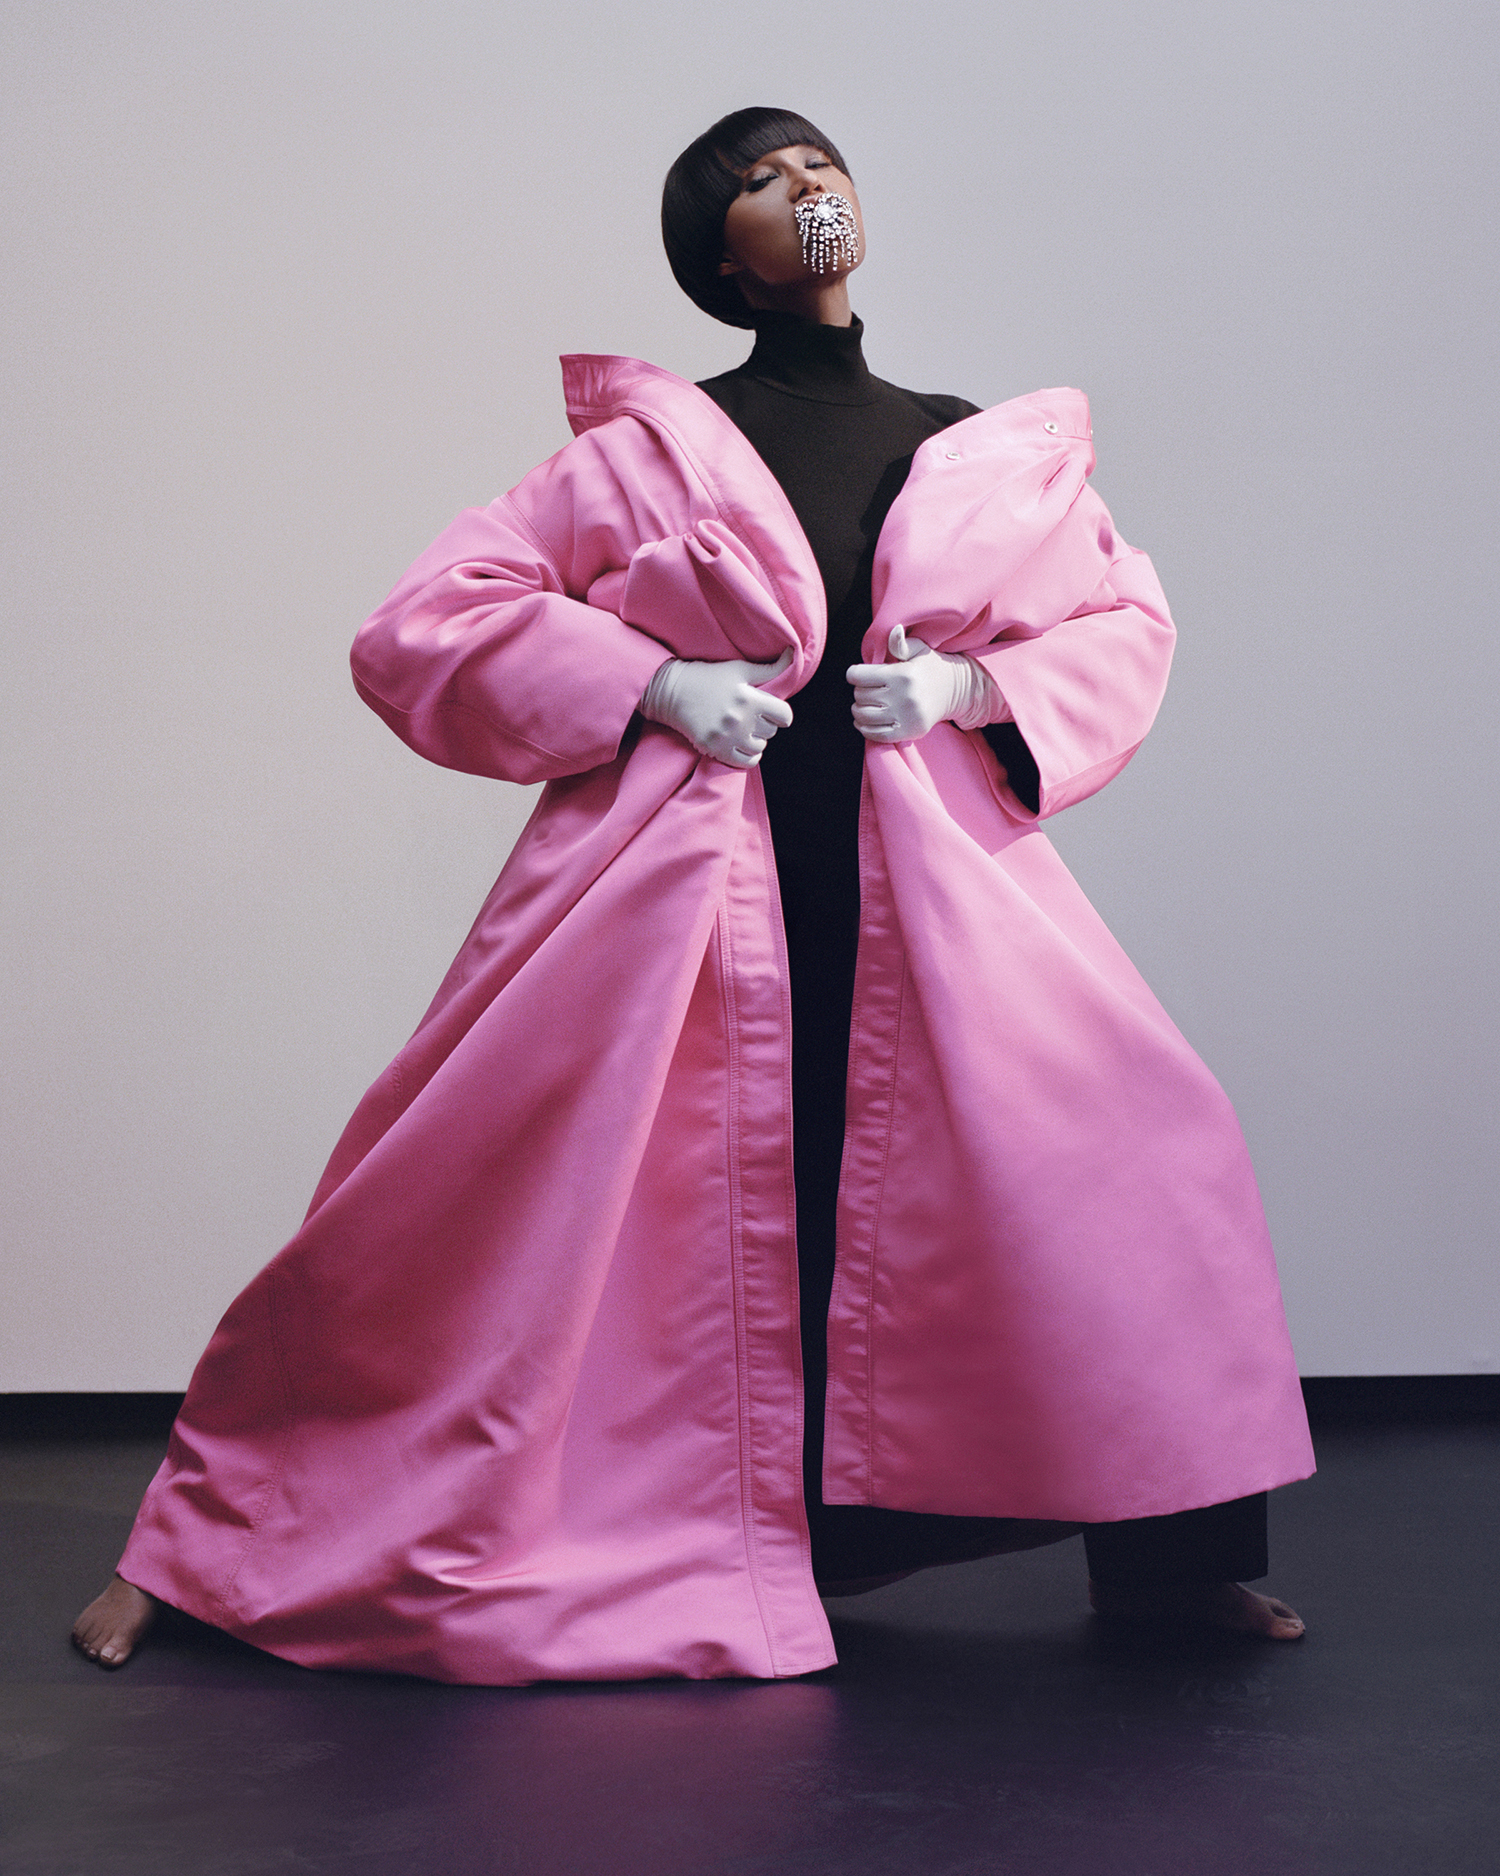 Demna Gvasalia Interviewed by André Leon Talley and Starring Iman